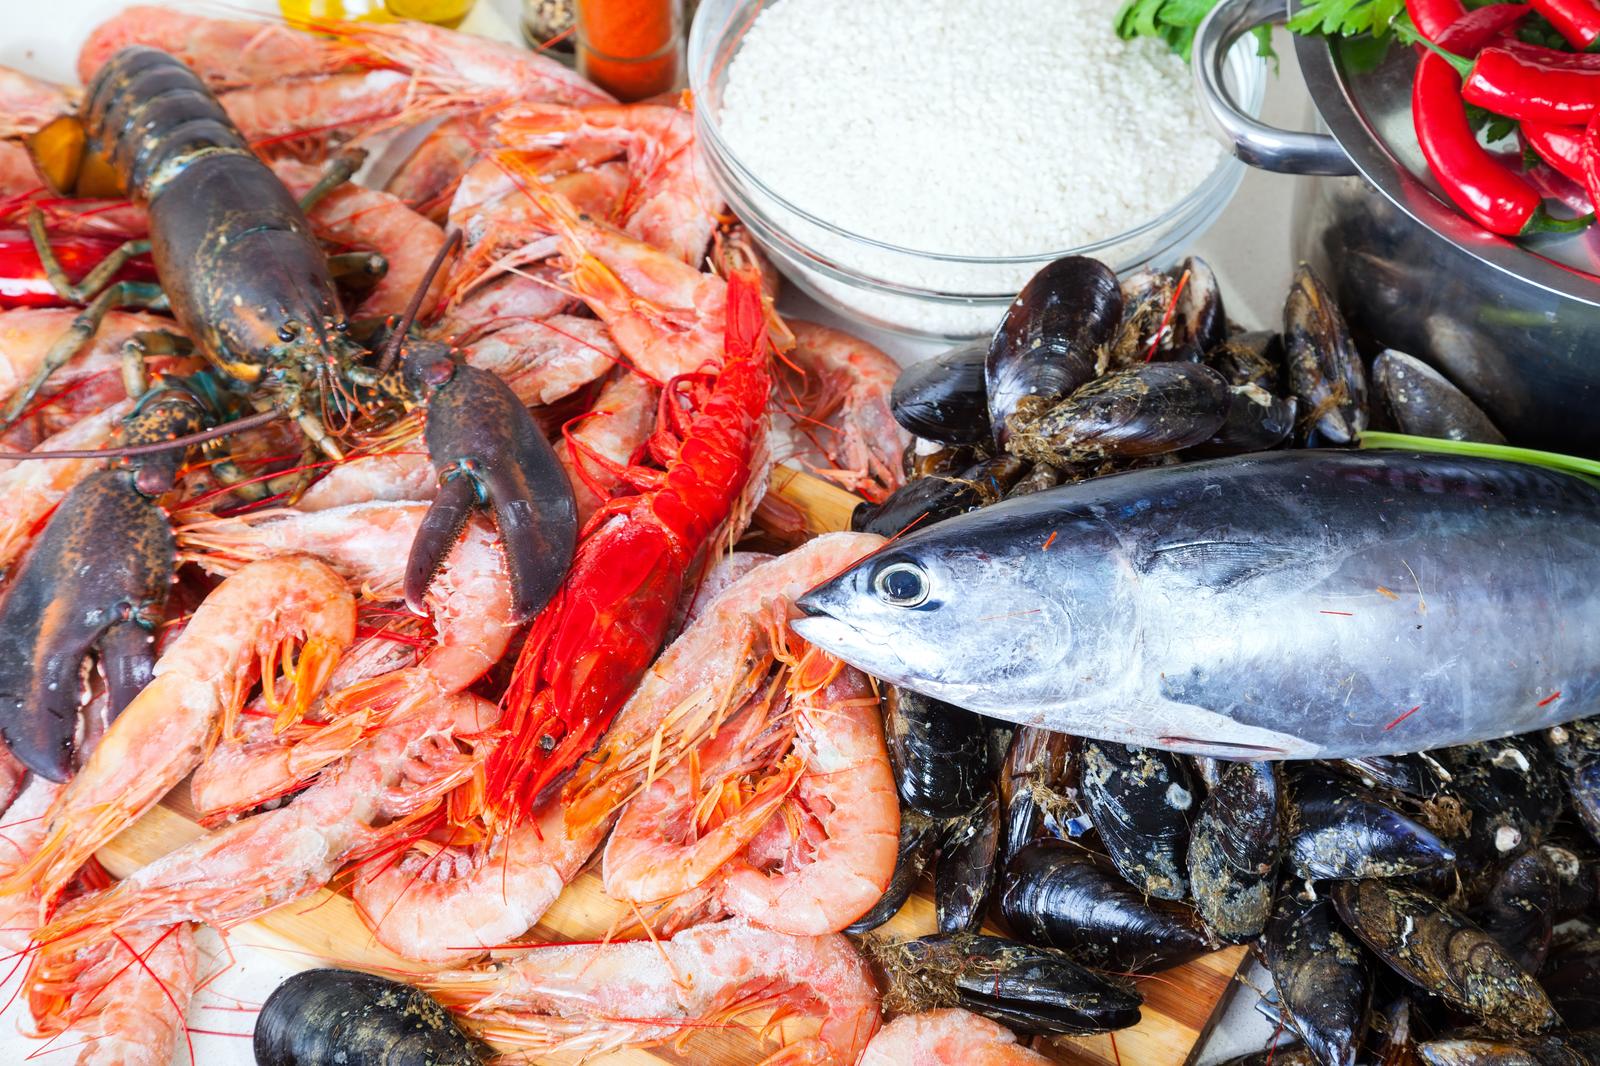 Wholesale of fish, crustaceans and fish products in Kunda